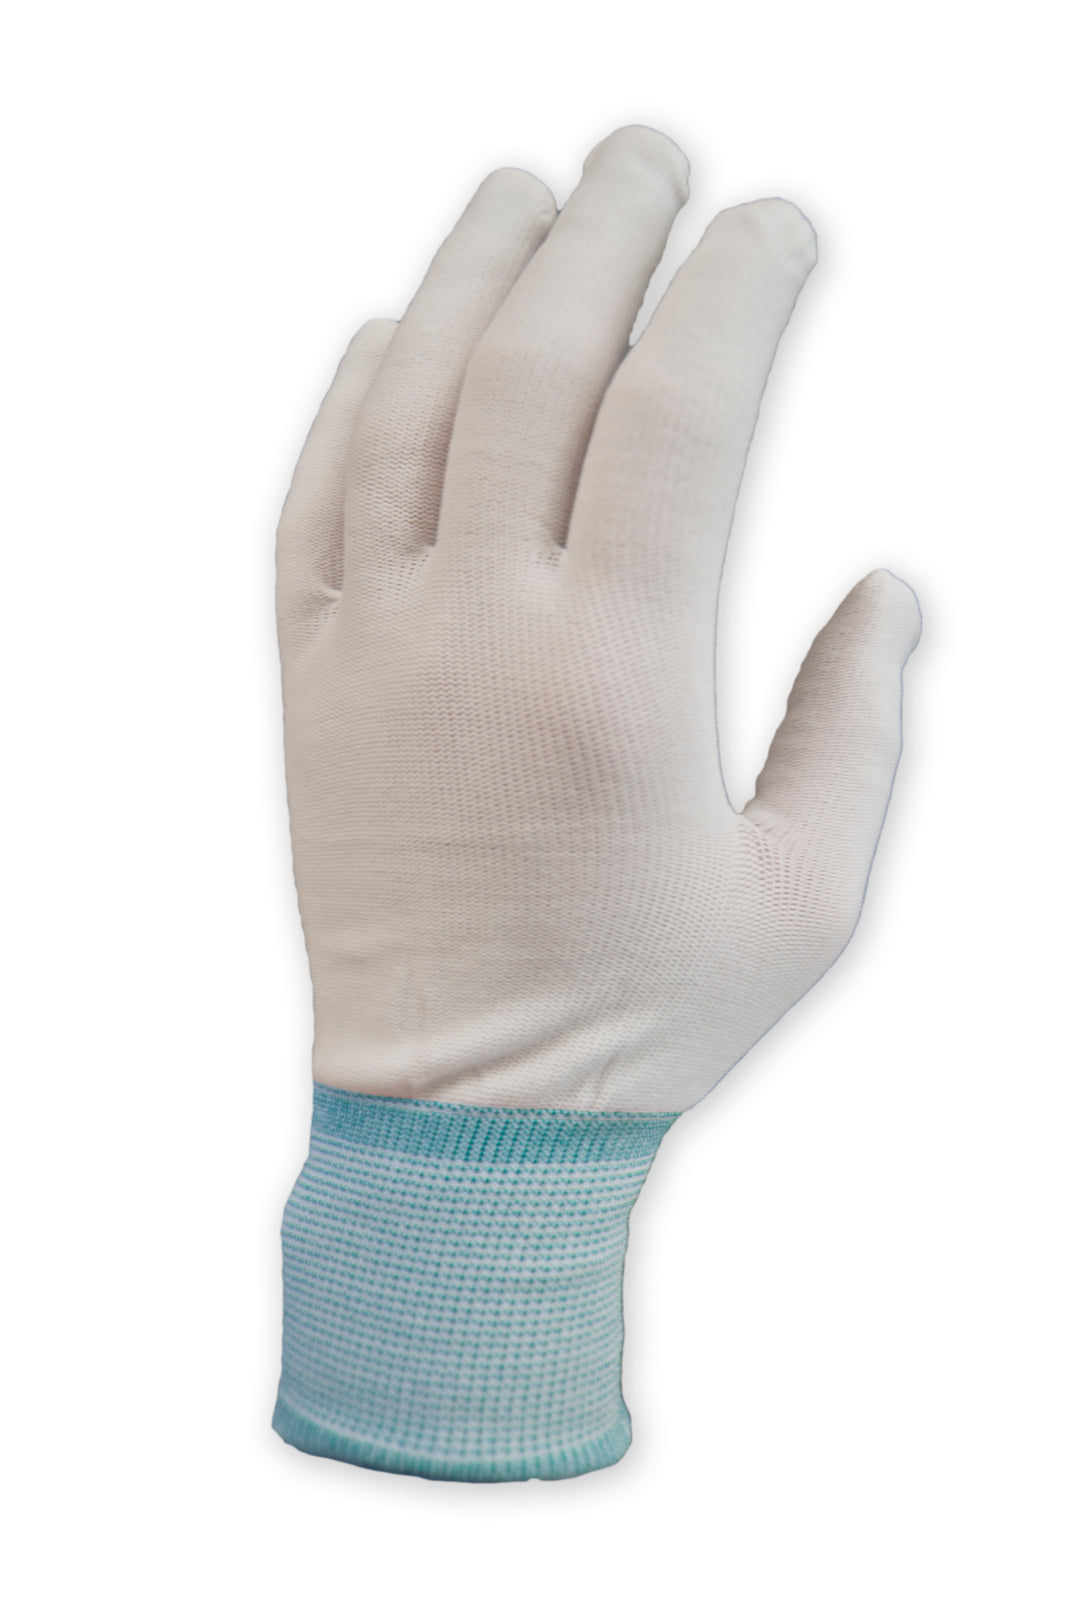 Purus GLFF Pure Touch Full Finger Glove Liners Small - XL